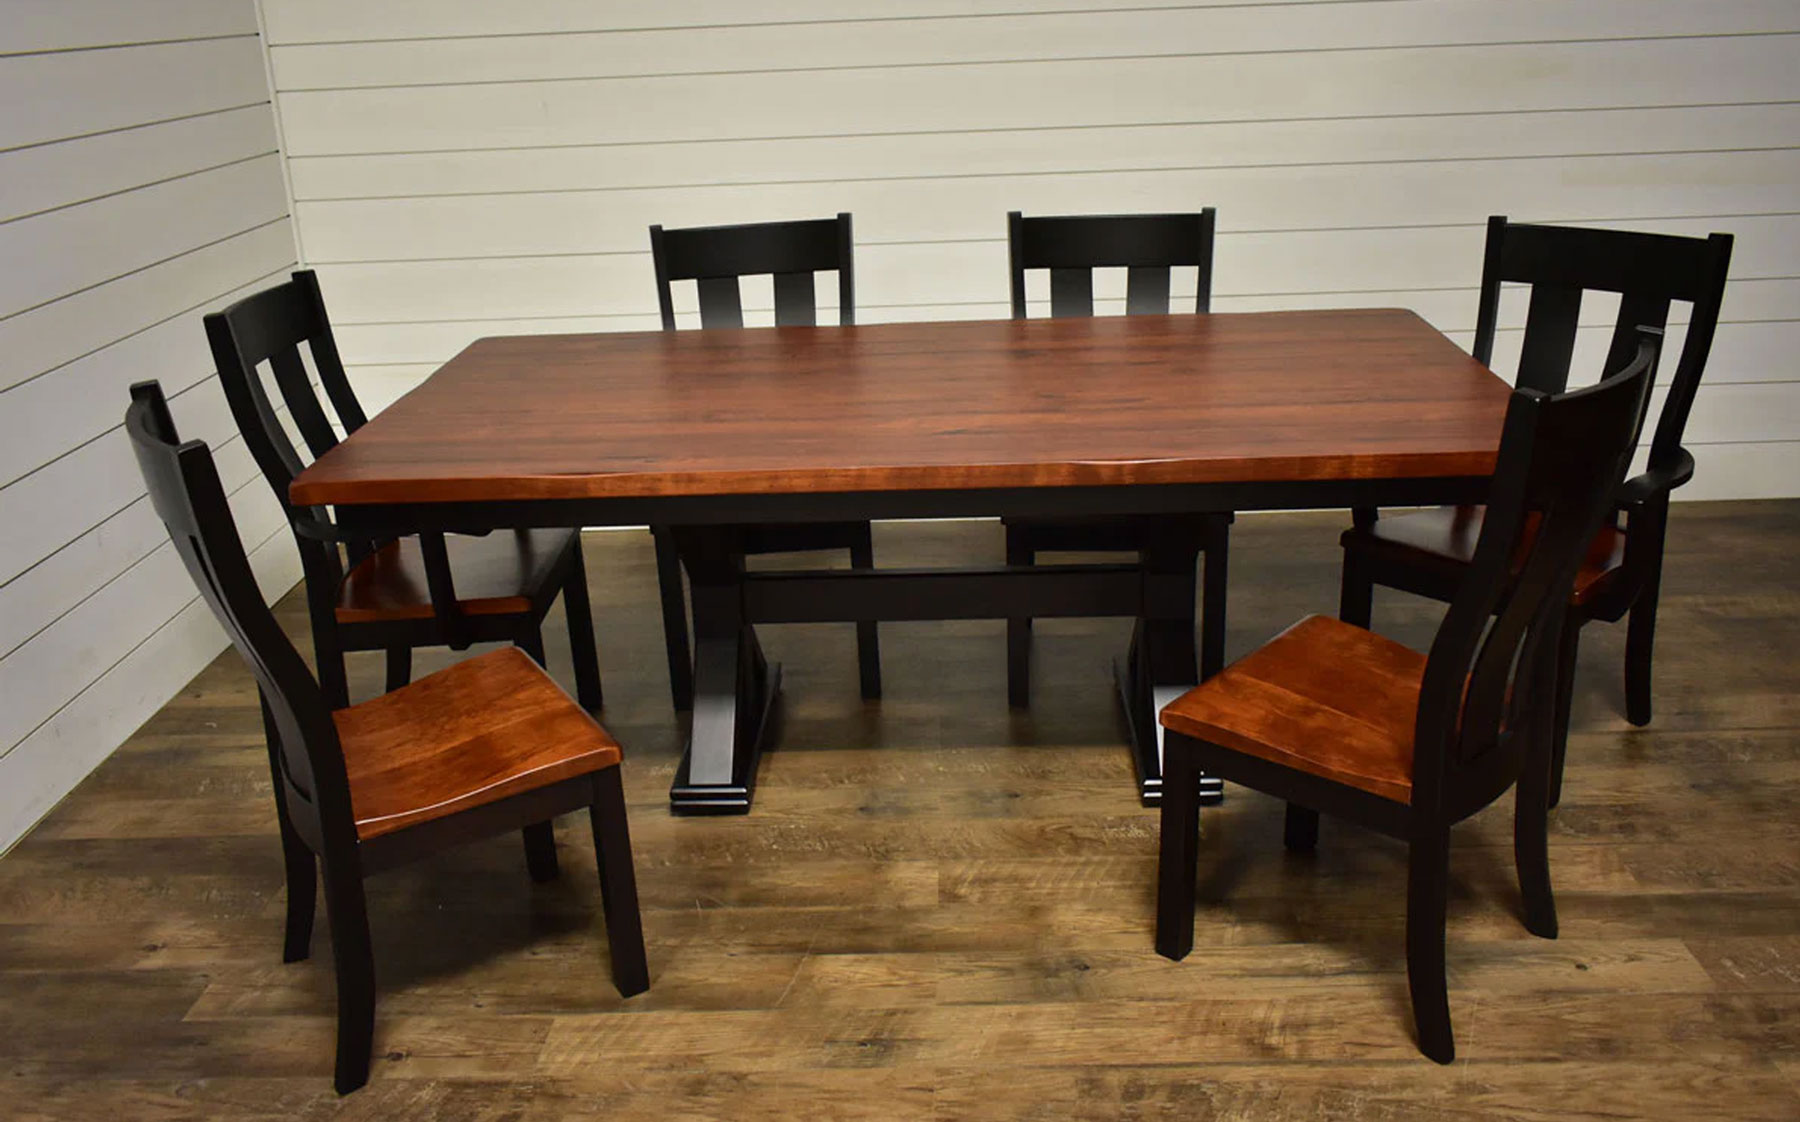 Urbana 44 x 84 Dining Table with (6) Dining Chairs